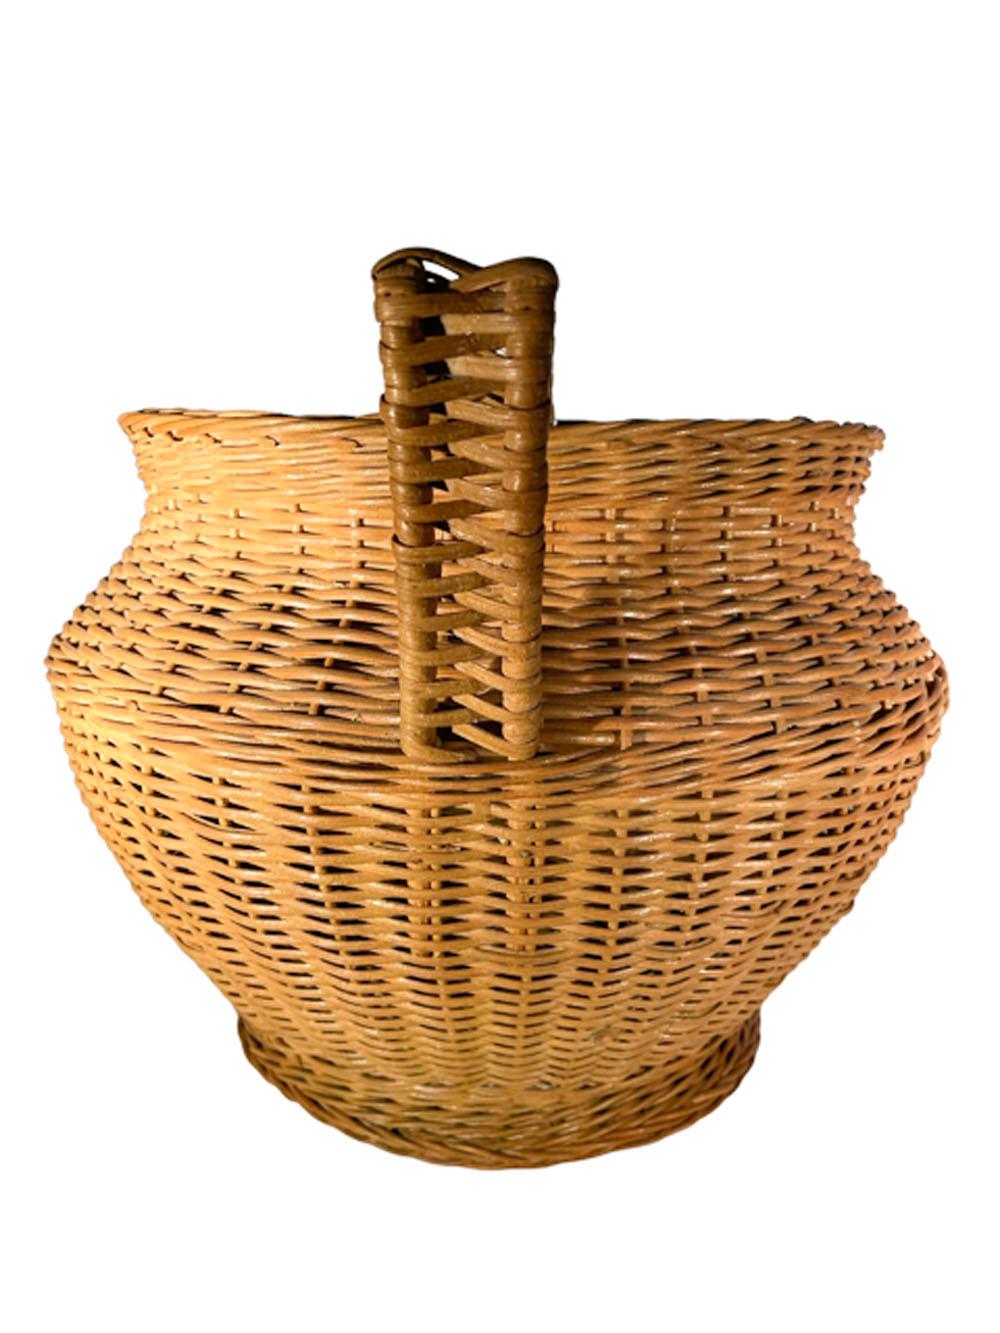 20th Century Large Art Deco Wicker Handled Cachepot Retaining Its Haywood-Wakefield Label For Sale